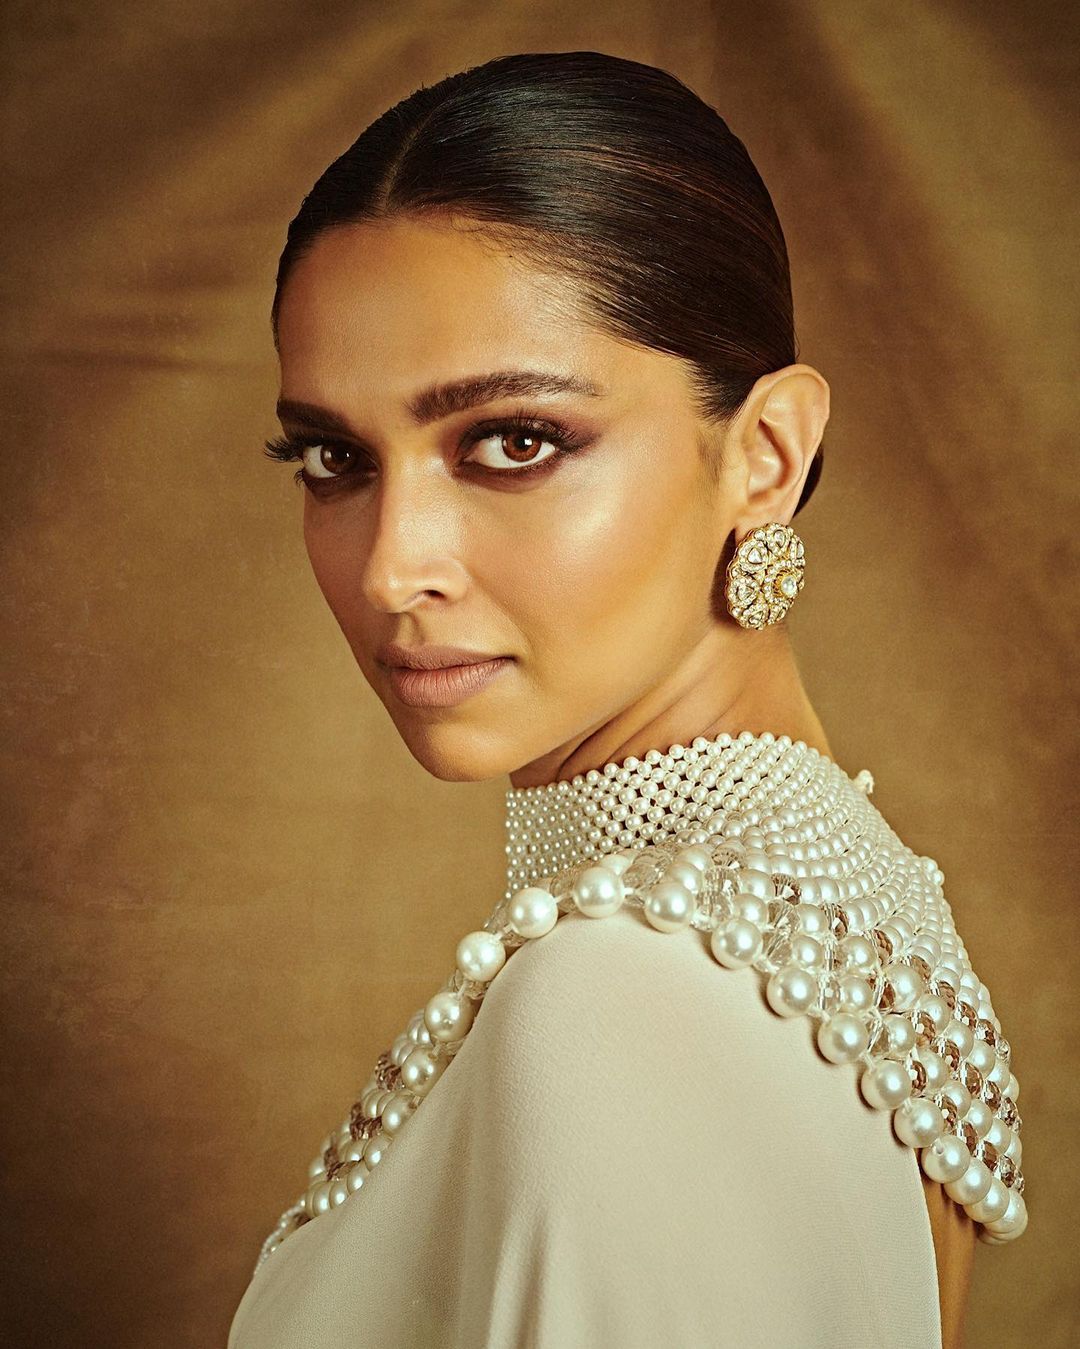 Needless to say, Deepika Padukone is the epitome of grace. (Image: Instagram)